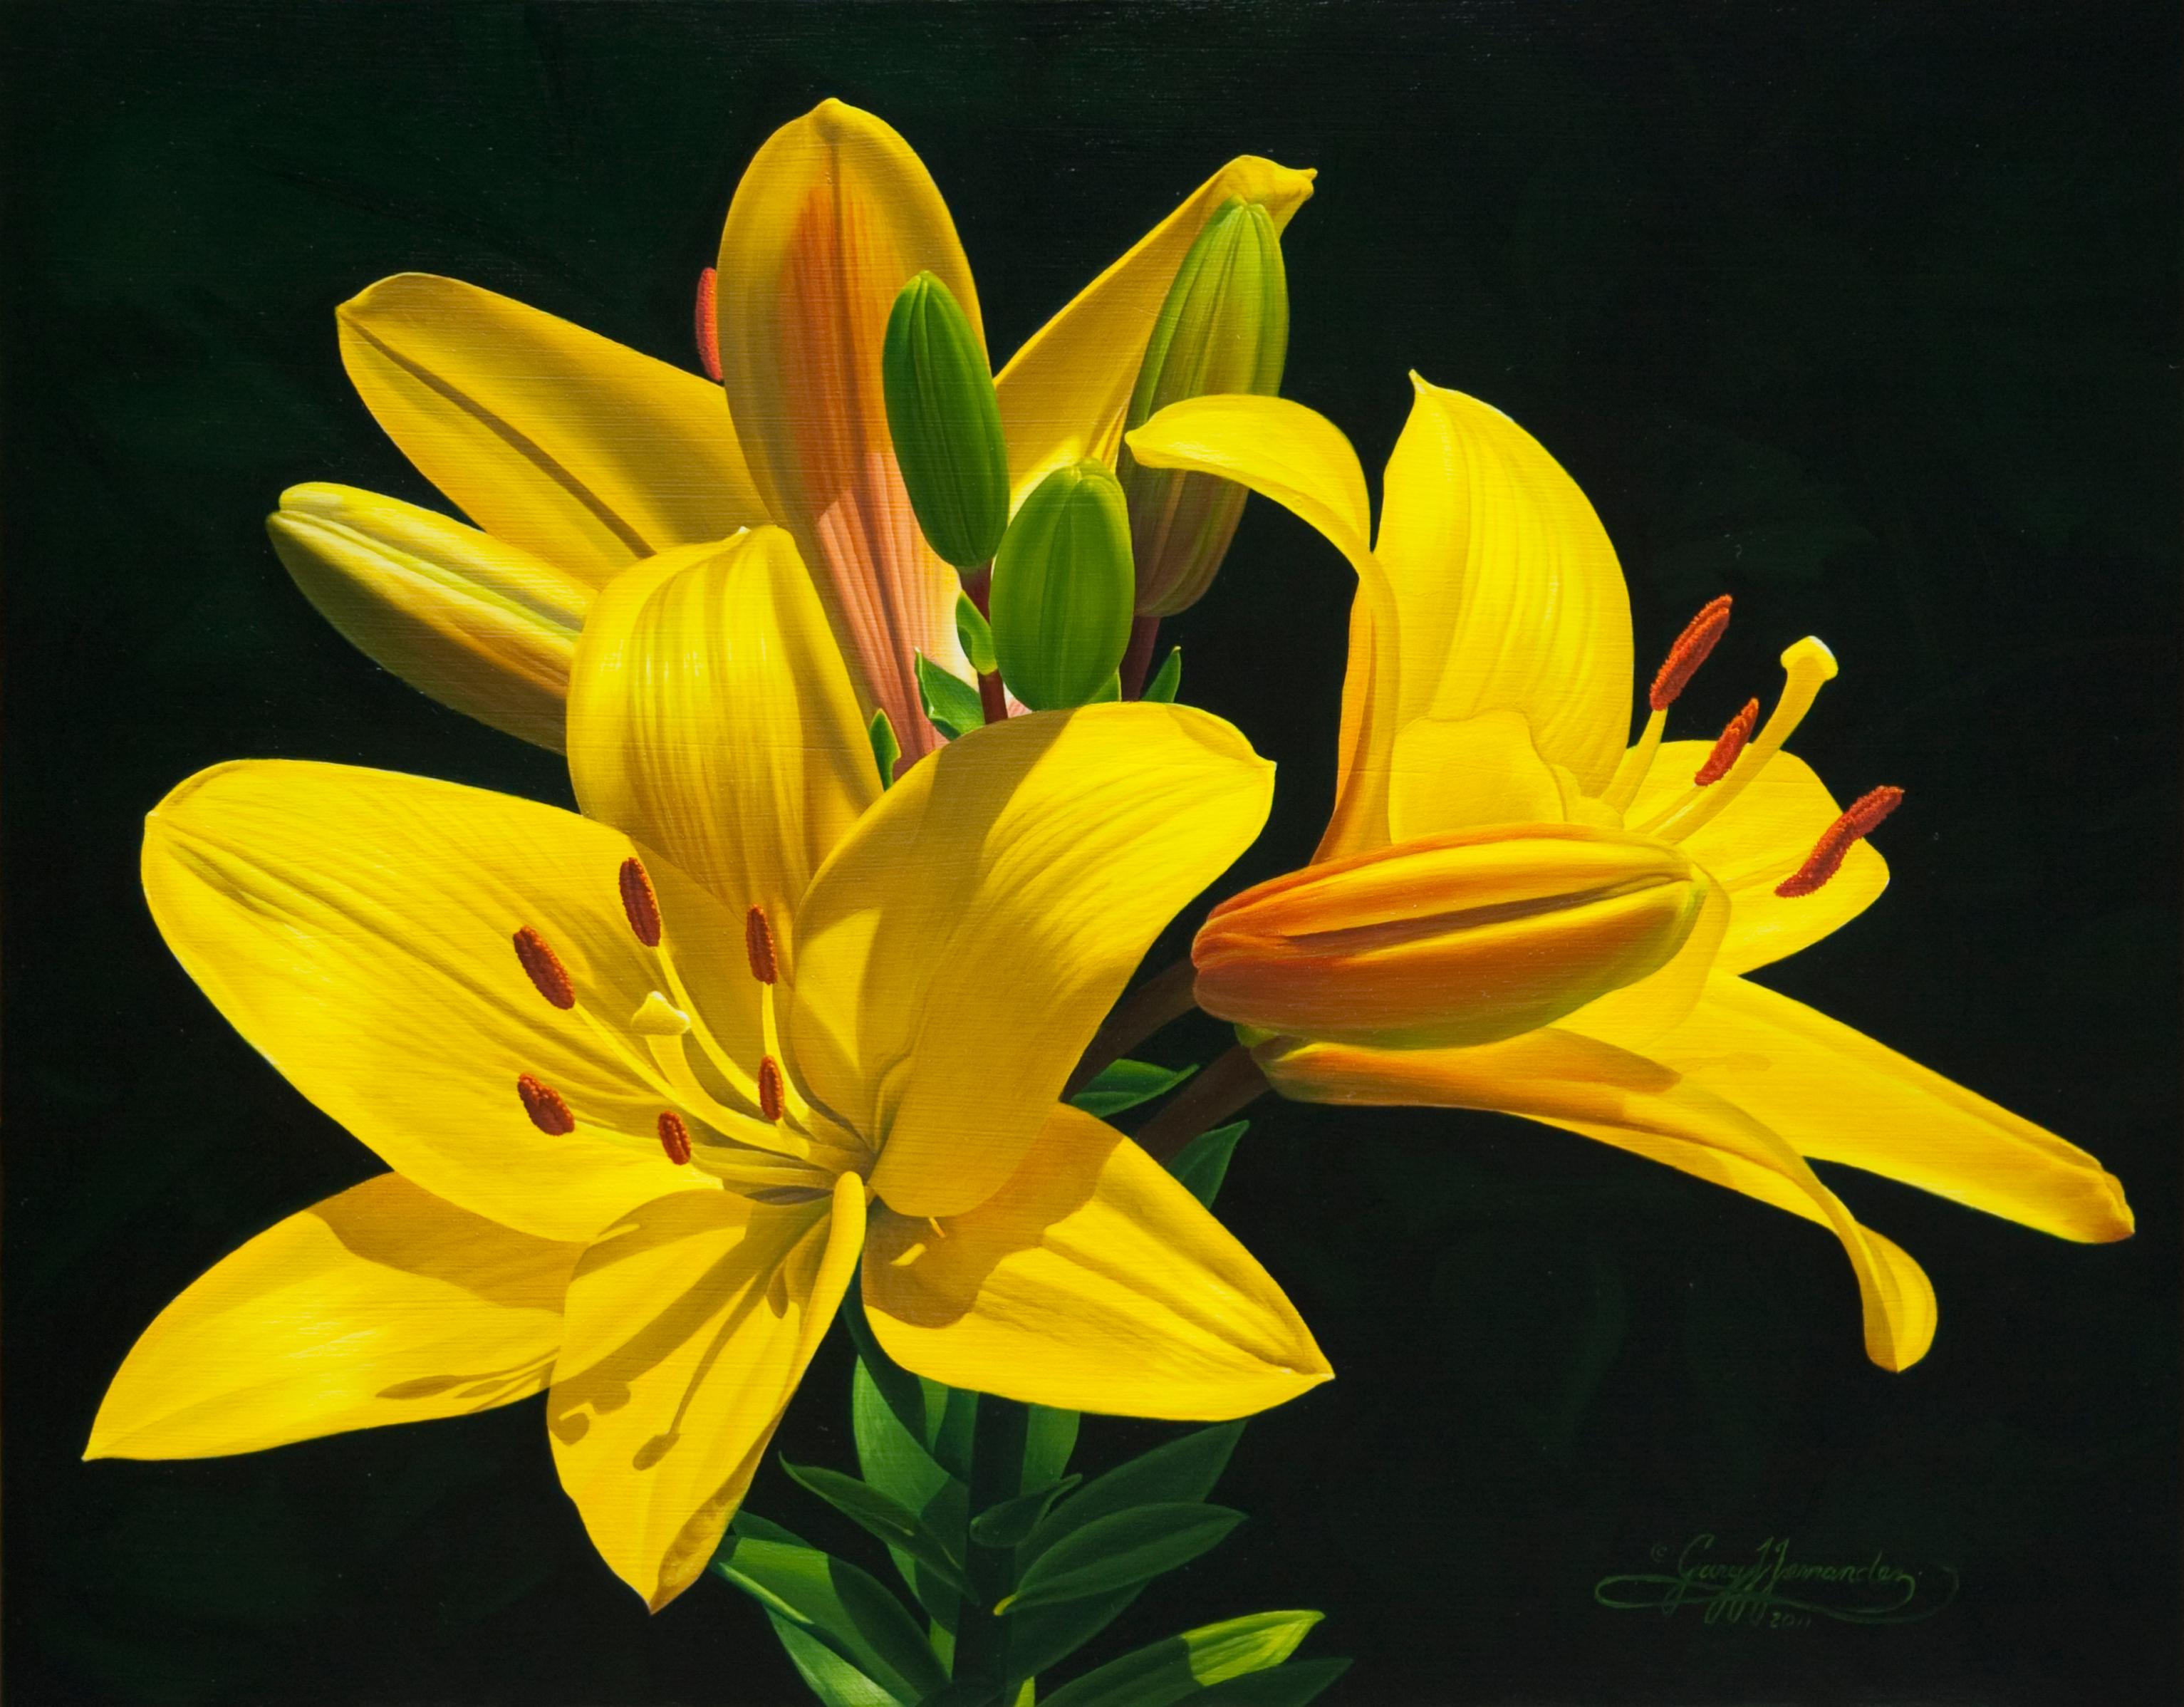 Monika's Lilies American Realist painter, floral painting, Representational - Black Still-Life Painting by Gary Hernandez